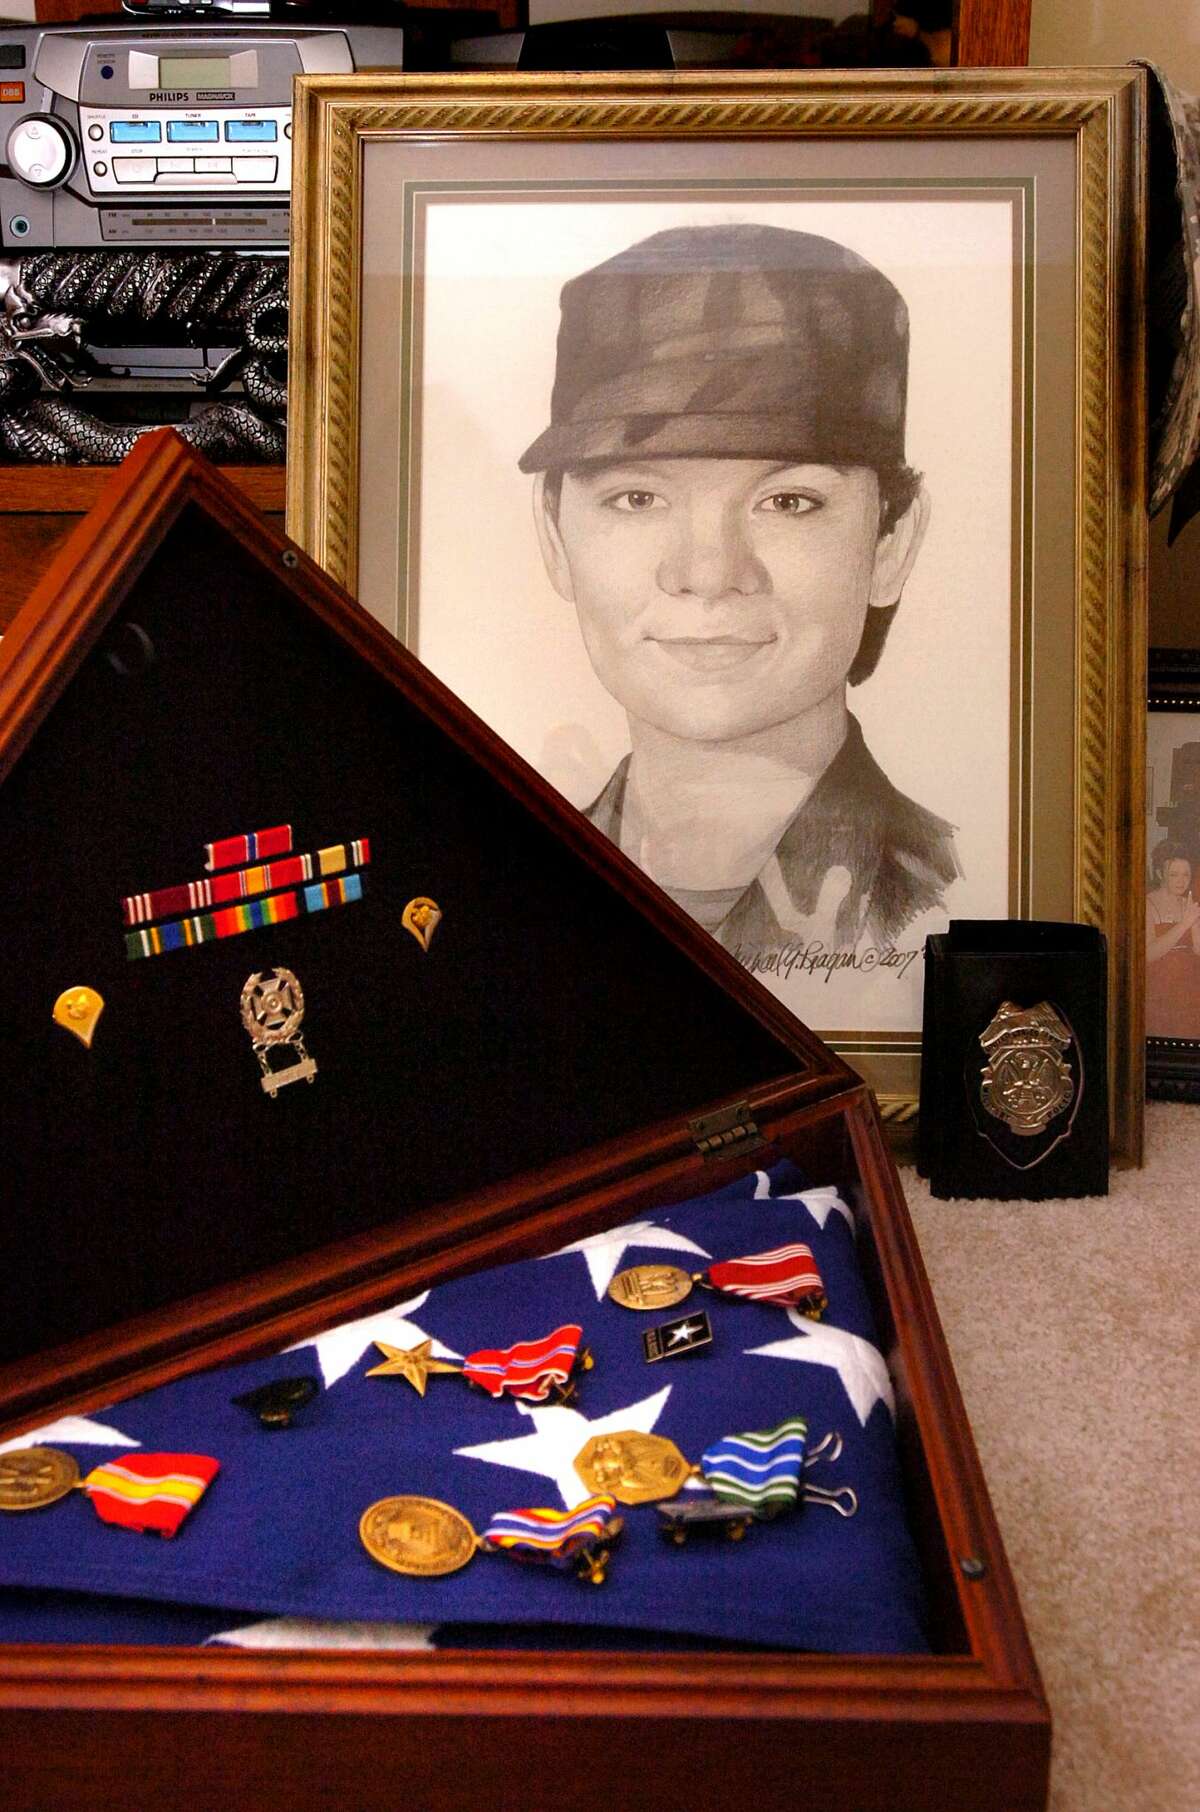 While many believed that the August death of Spc. Kamisha Block of Vidor was caused by friendly fire, an investigation report (recently released by the woman's family) states that the former M.P. was murdered by another American soldier while stationed in Iraq. Wednesday, June 18, 2008. Photo by Guiseppe Barranco